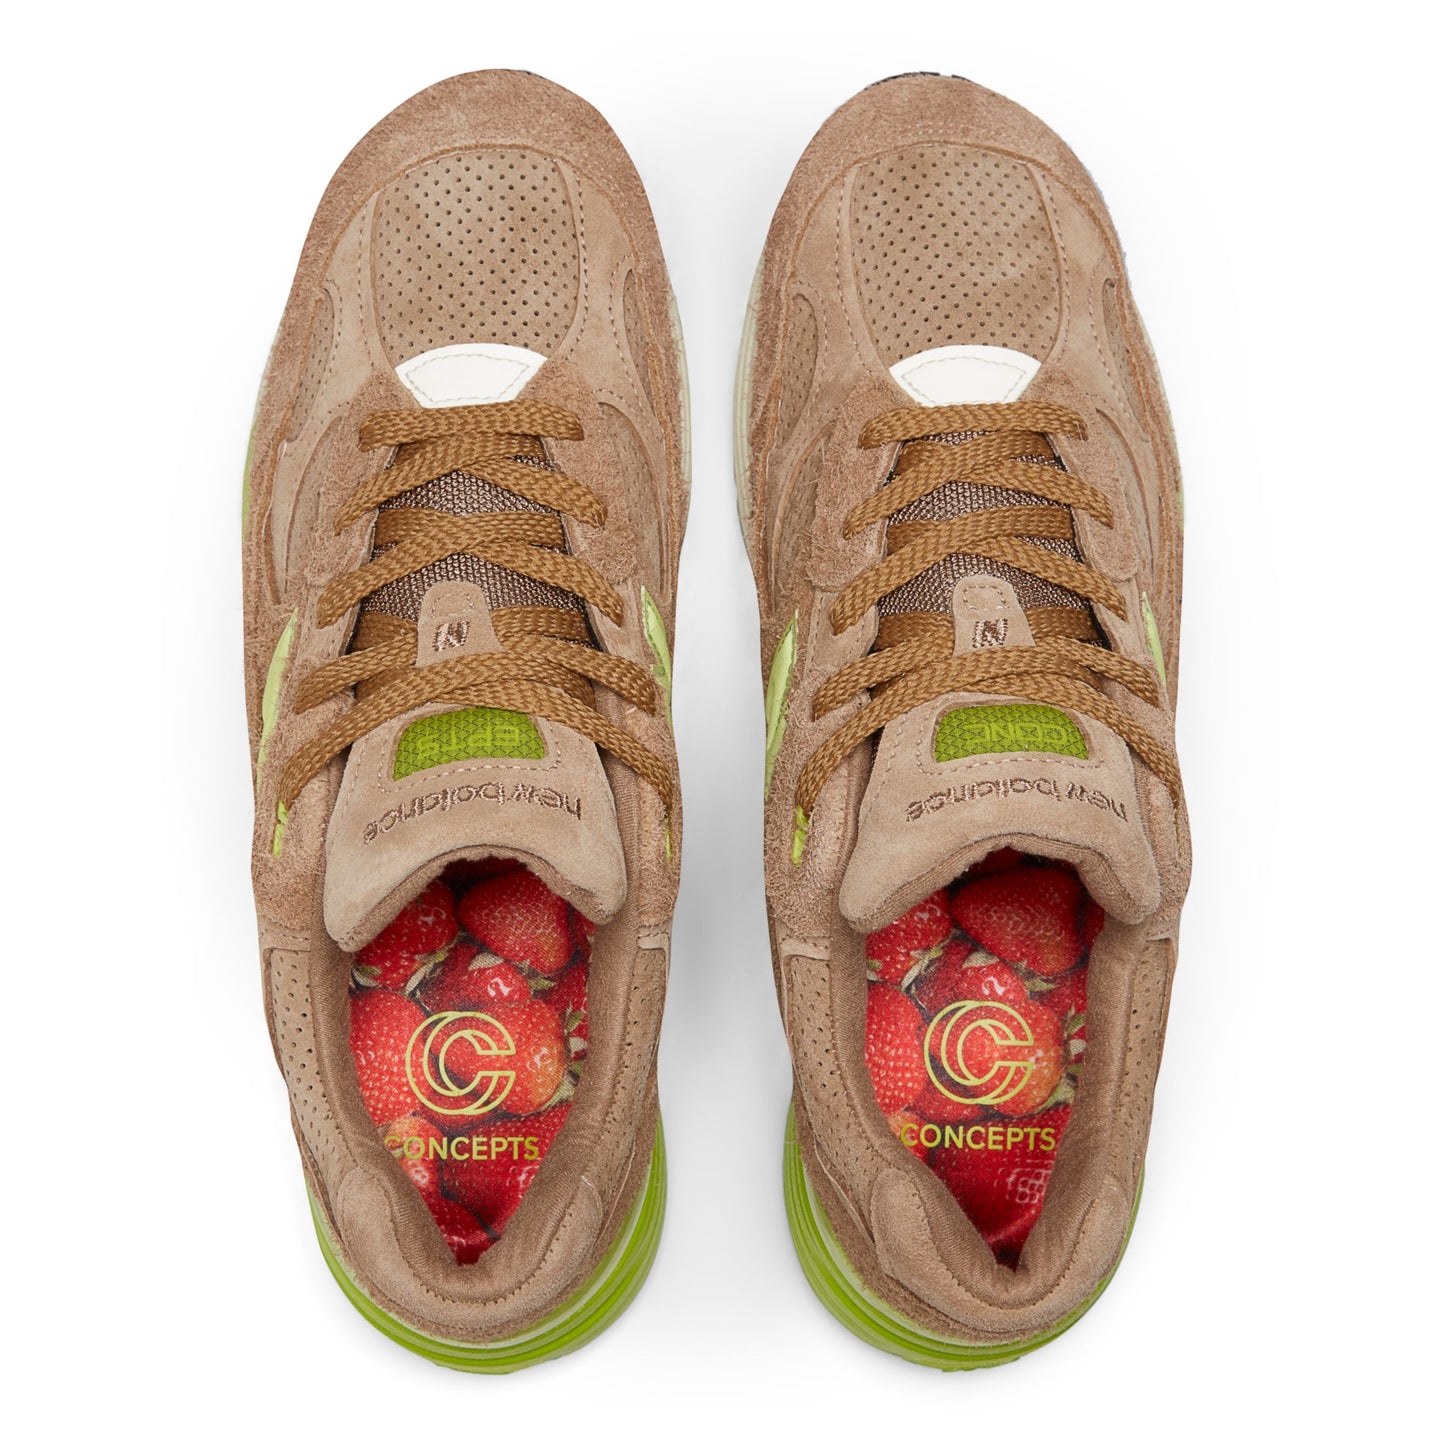 New Balance x Concepts 992 "Low Hanging Fruit"